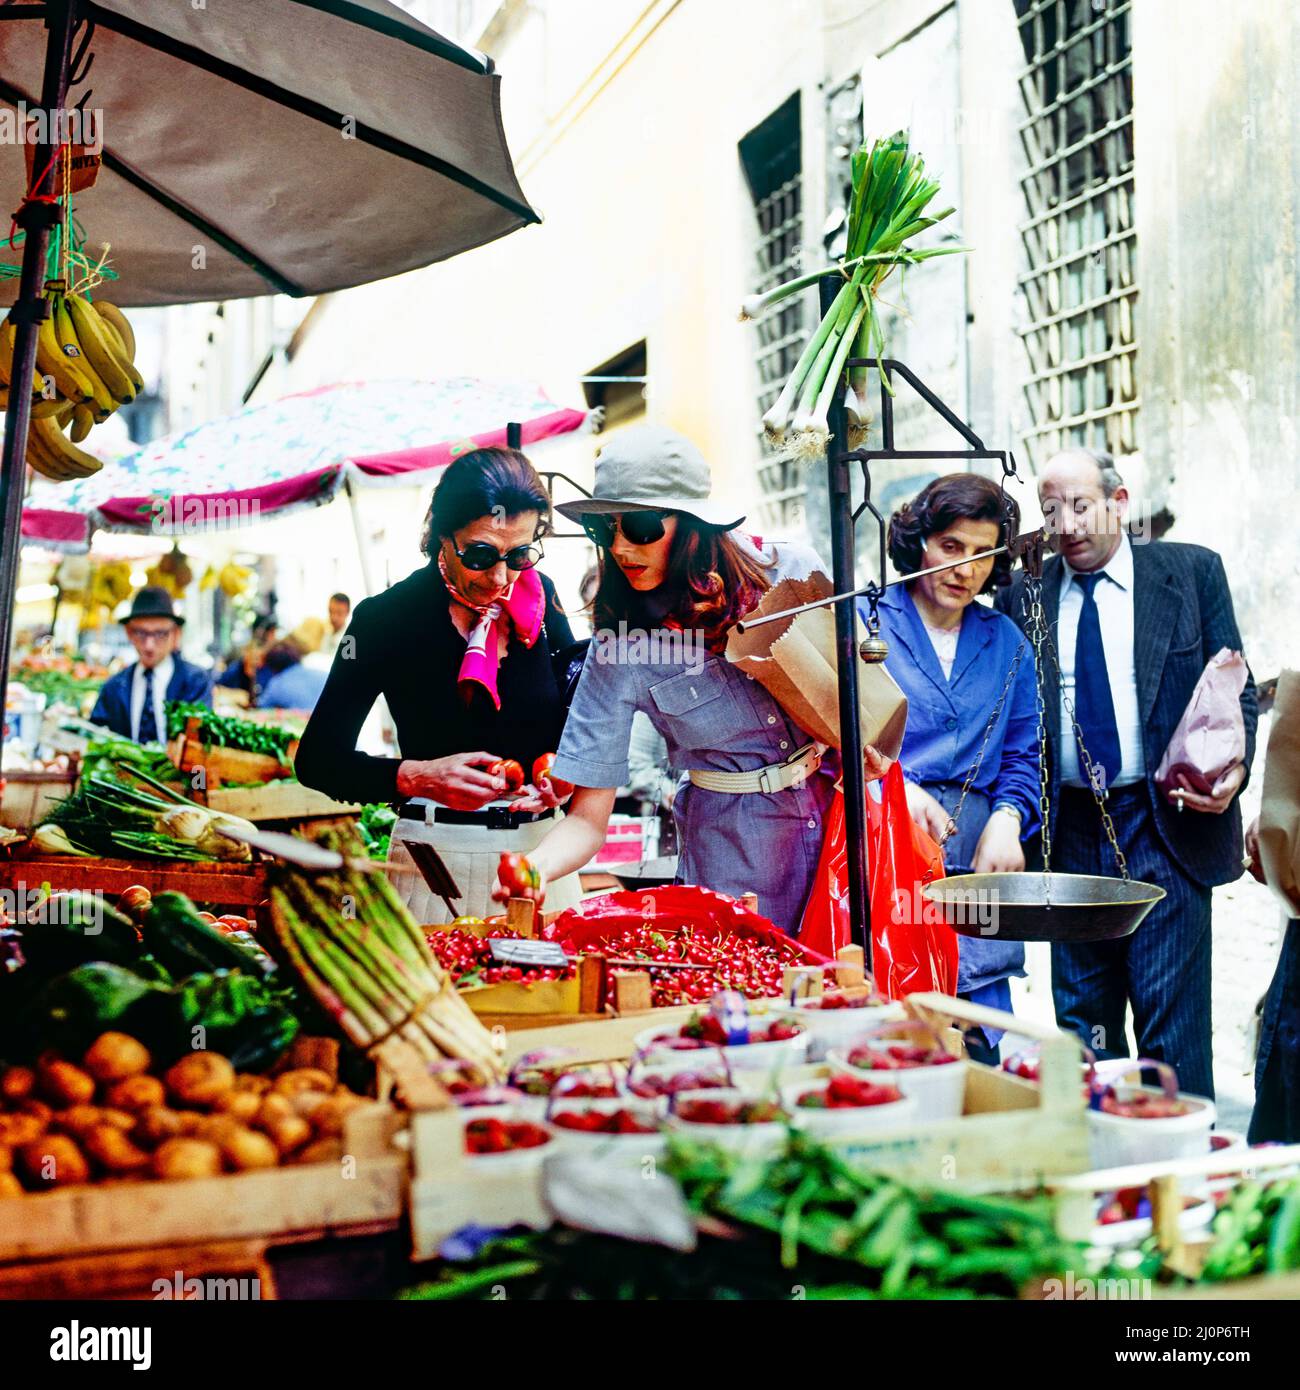 Vintage Rome 1970s, elegant woman and people shopping for food, street market, Italy, Europe, Stock Photo